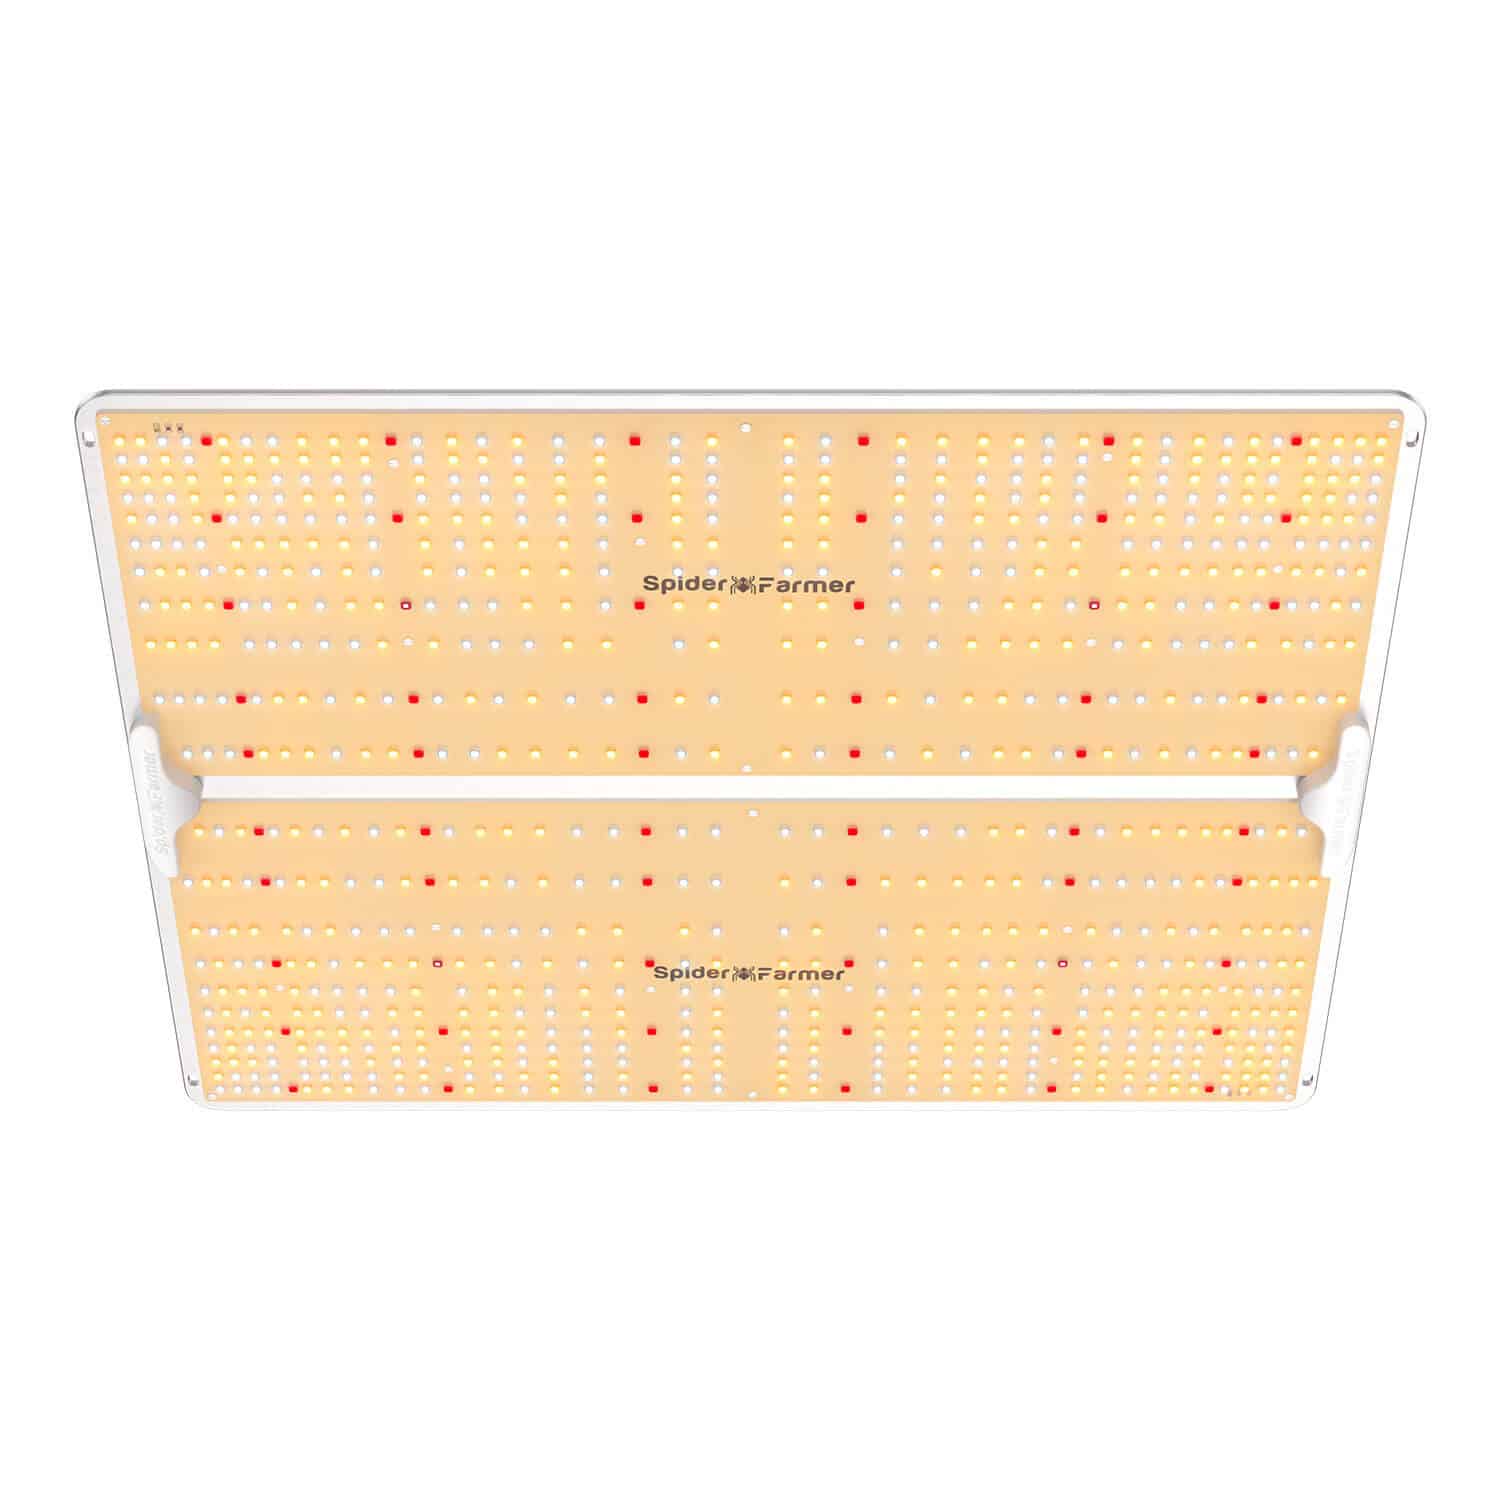 Product Image:Spider Farmer® SF4000 450W LED Grow Light With Dimmer Knob